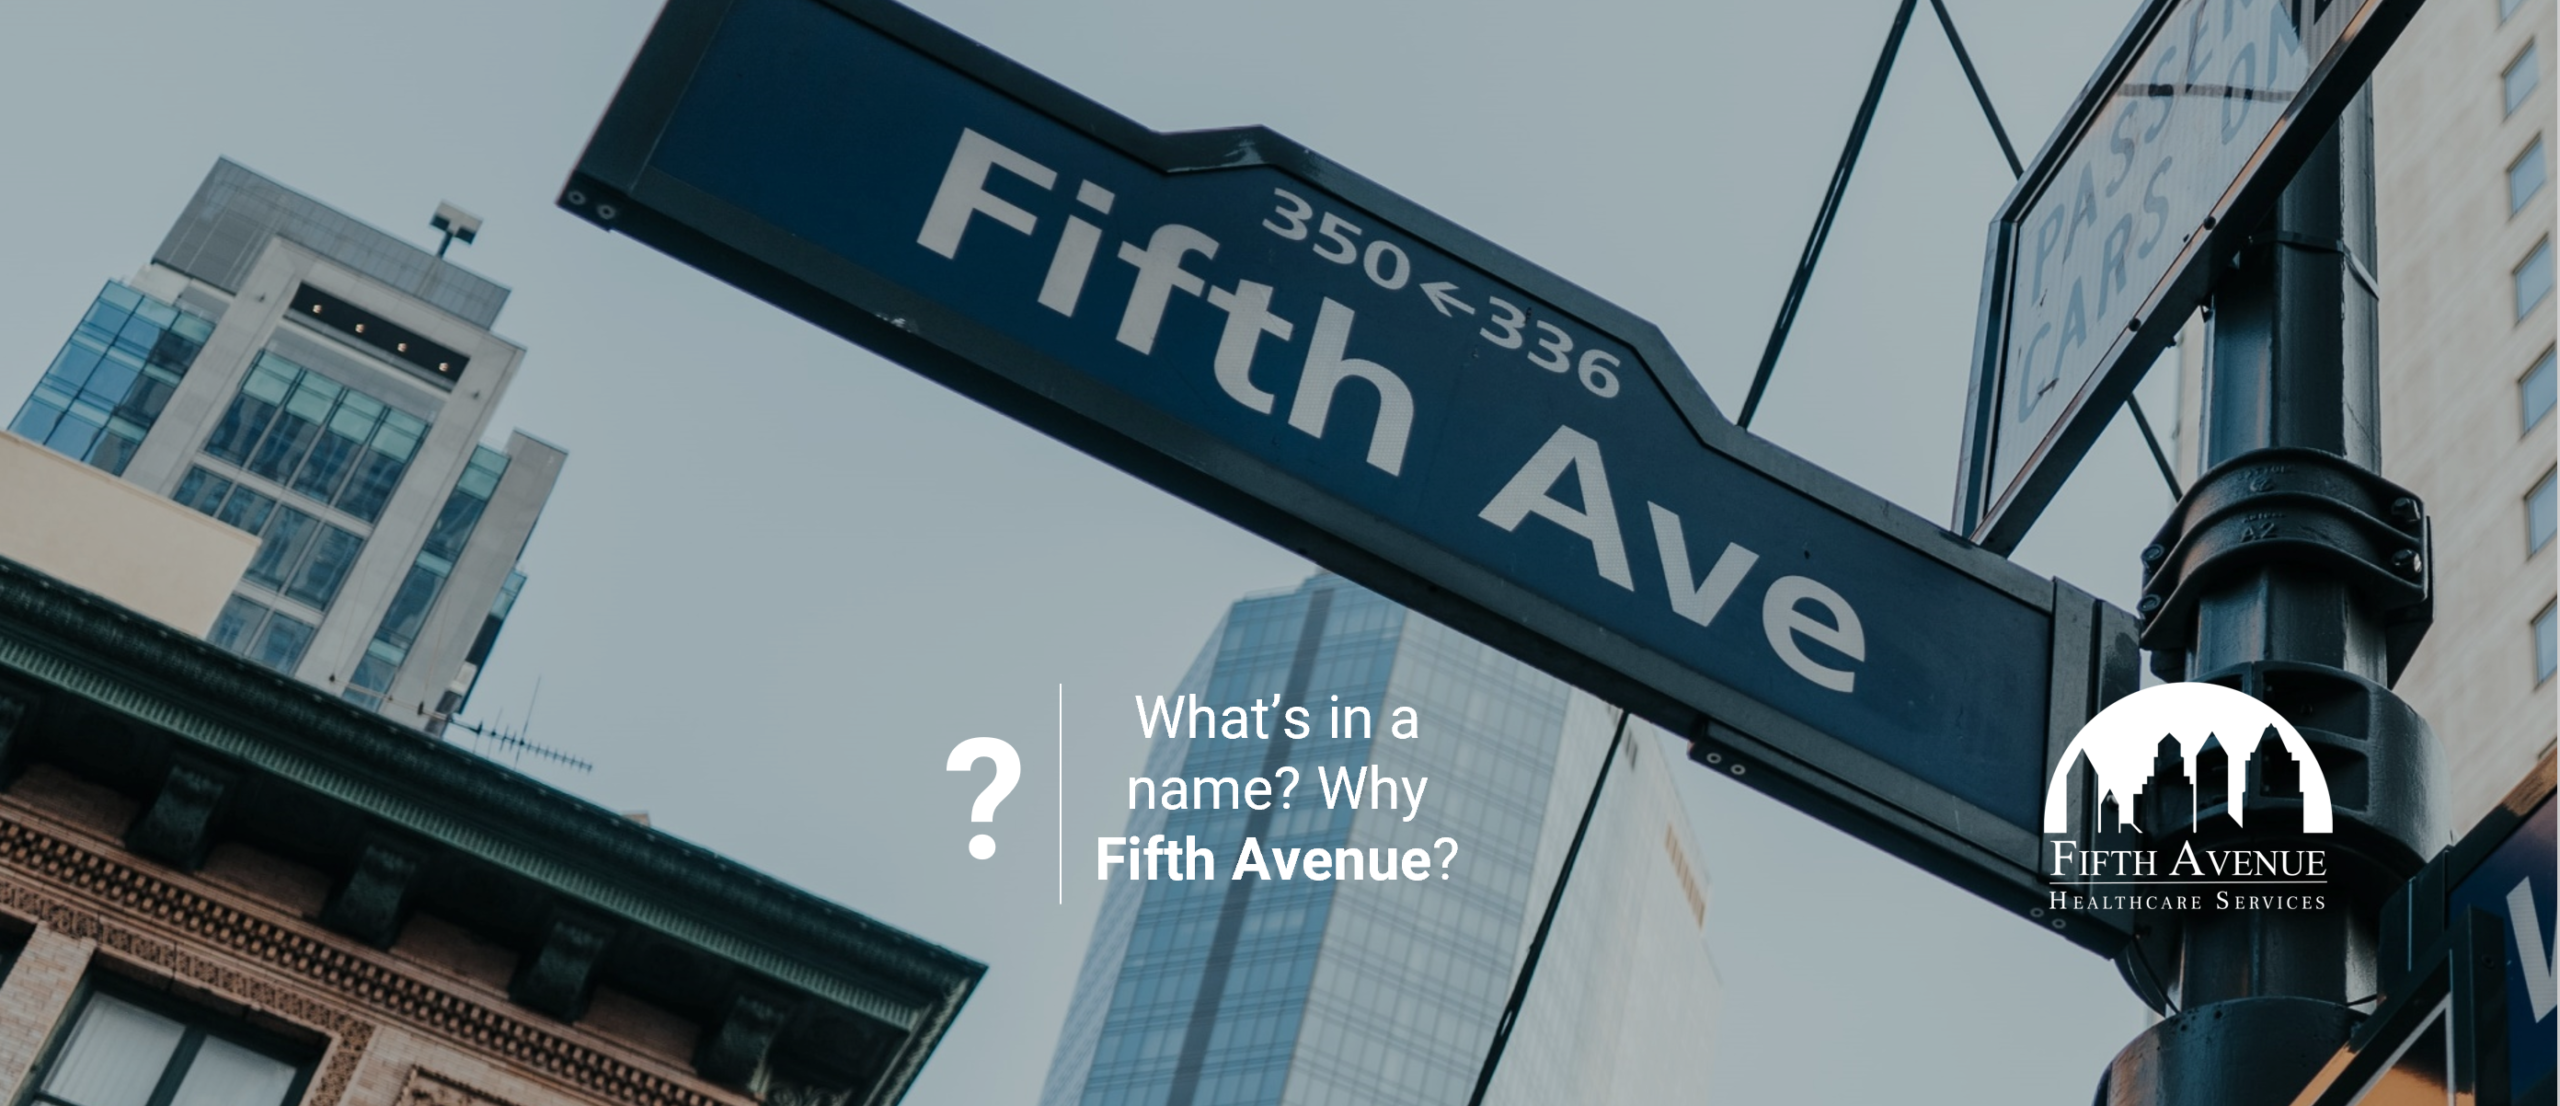 Fifth Avenue What's In A Name